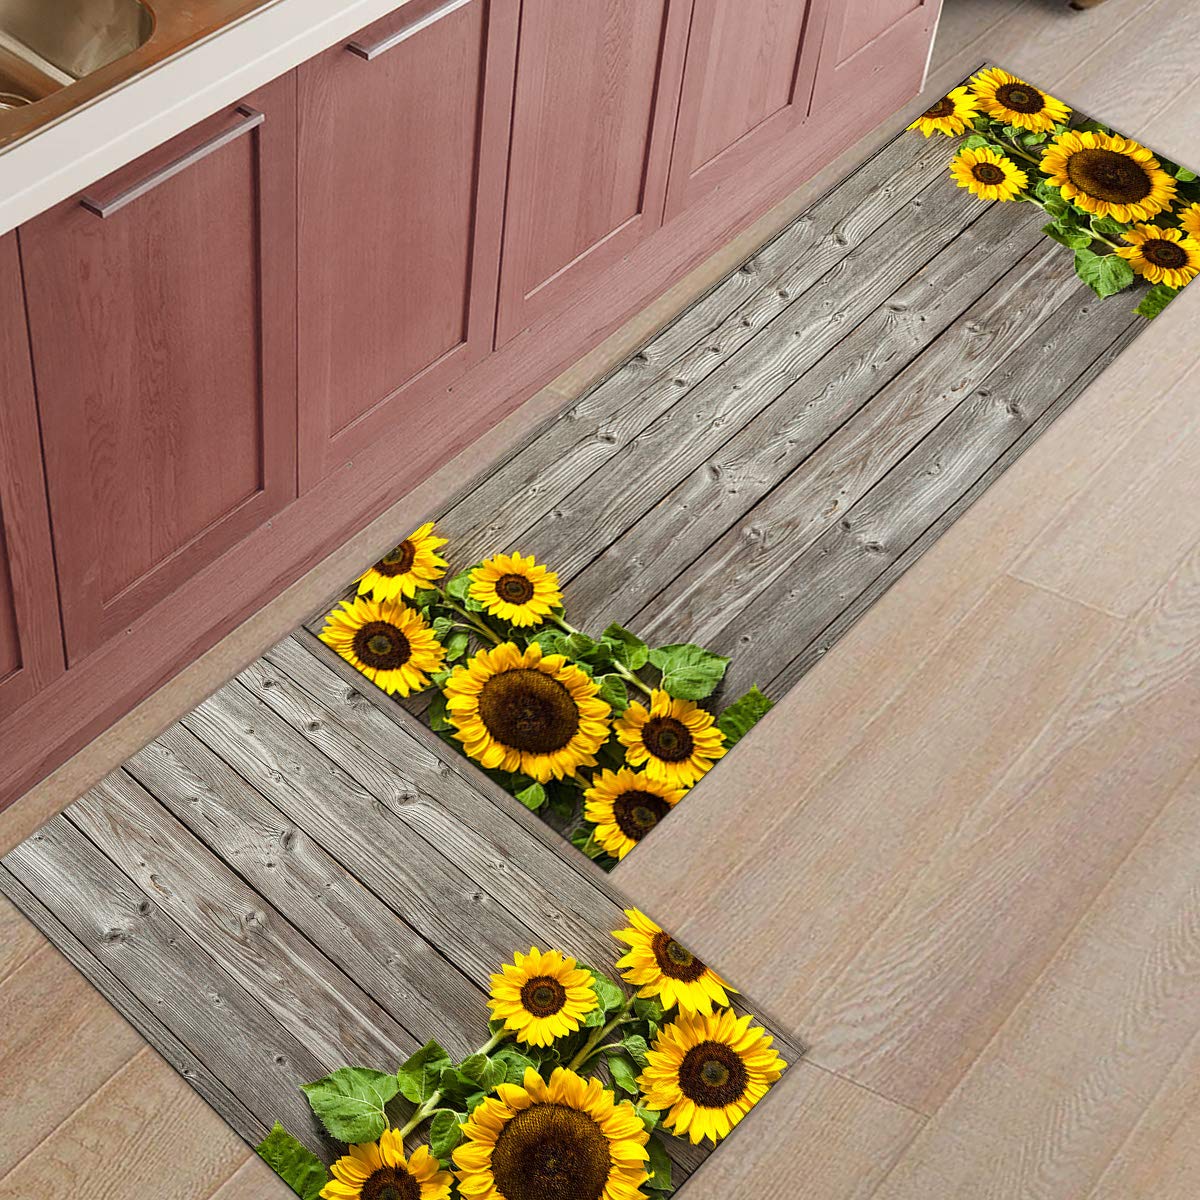 Kitchen Rugs and Mats Non Slip Cushioned Anti Fatigue Machine Washable 2 Pieces Rug Set Kitchen Mats for Floor,Sunflower on Stripe Grey Old Wooden Board (15.7"x23.6"+15.7"x47.2" inches)